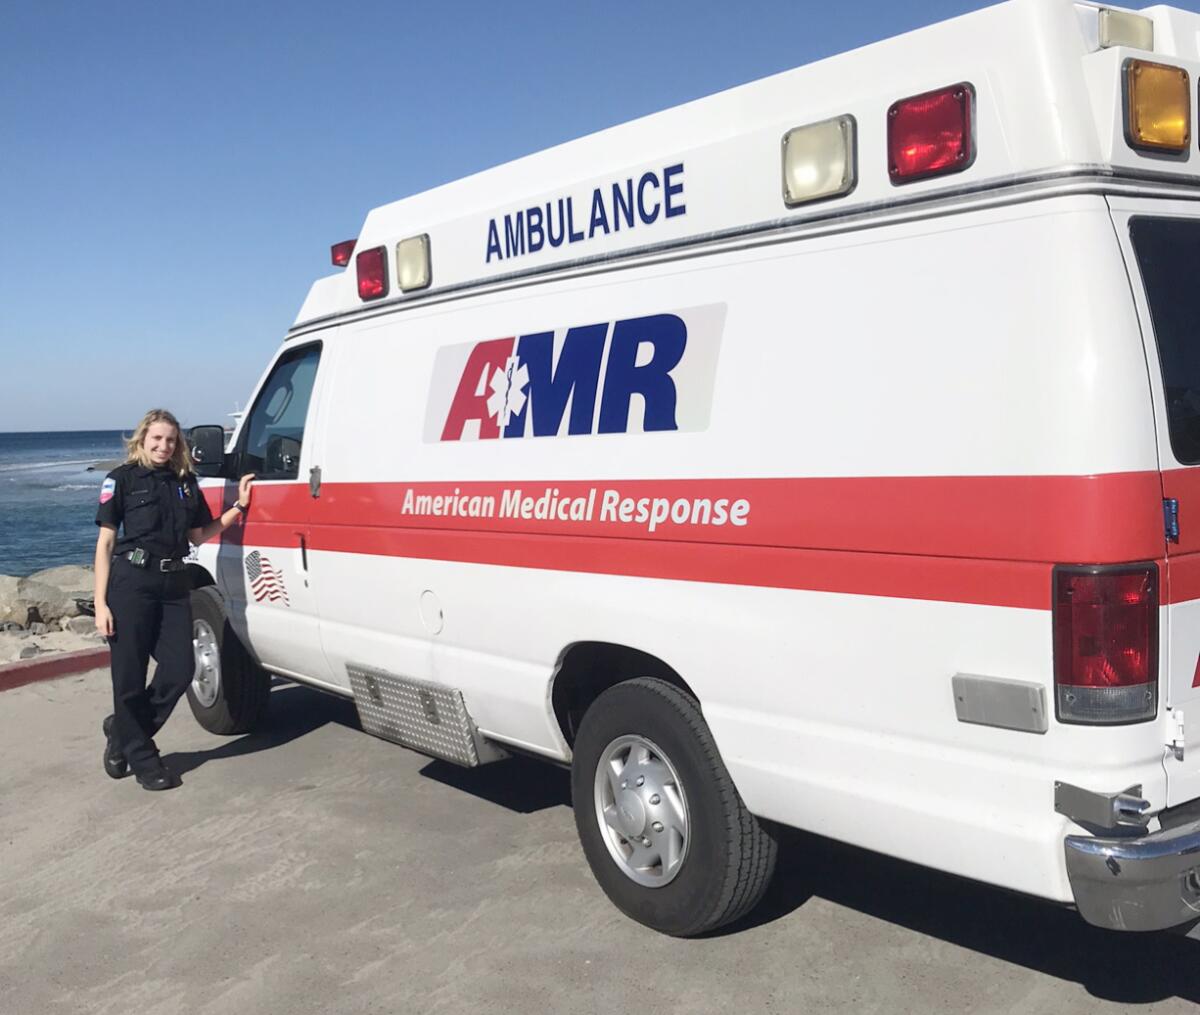 American Medical Response may be replaced as provider of city ambulance services.